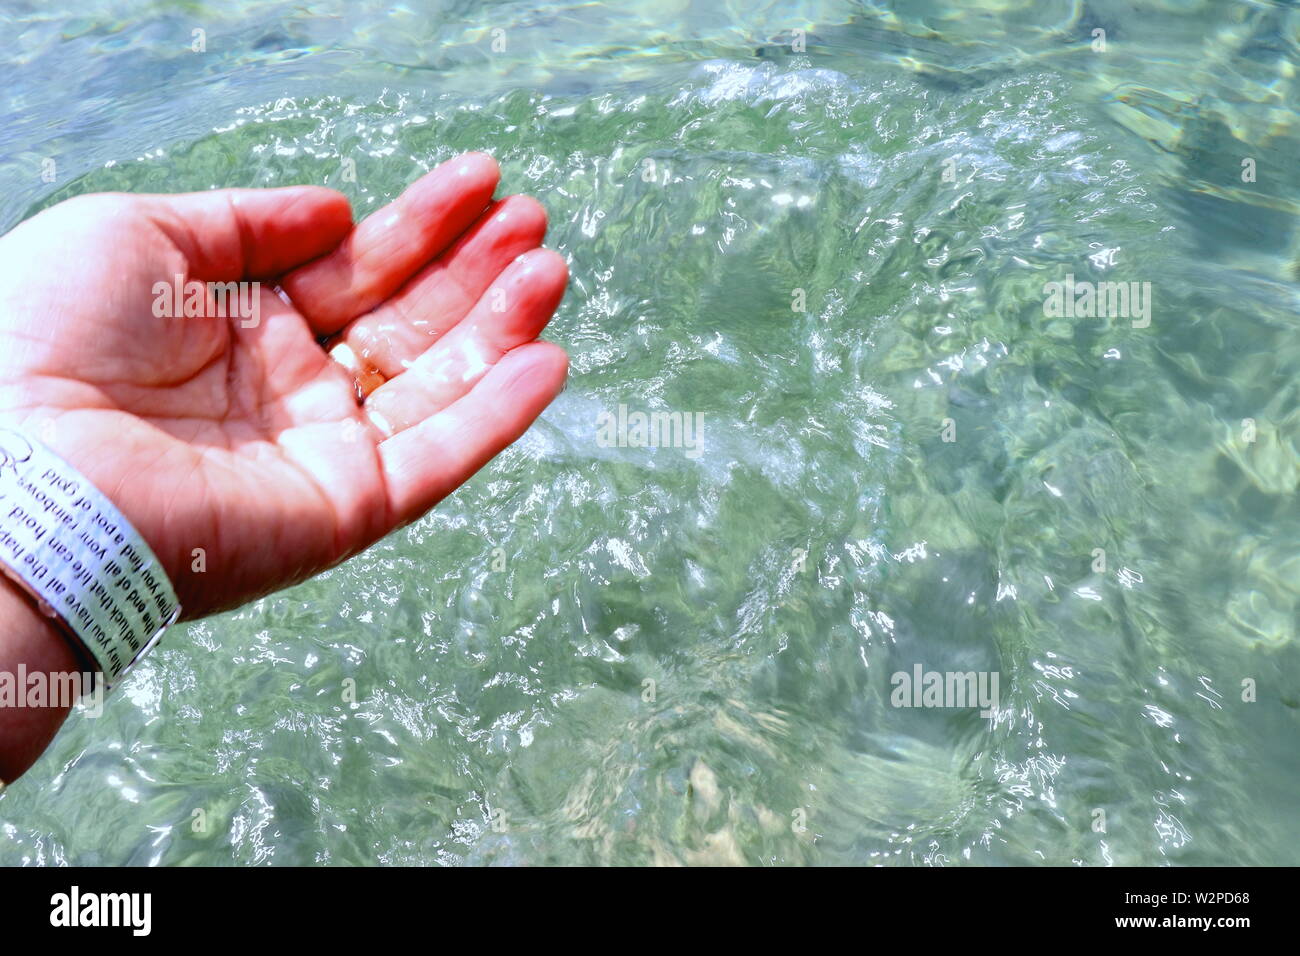 Woman's hand with silver bracelets and rings, splashing in ocean water Stock Photo